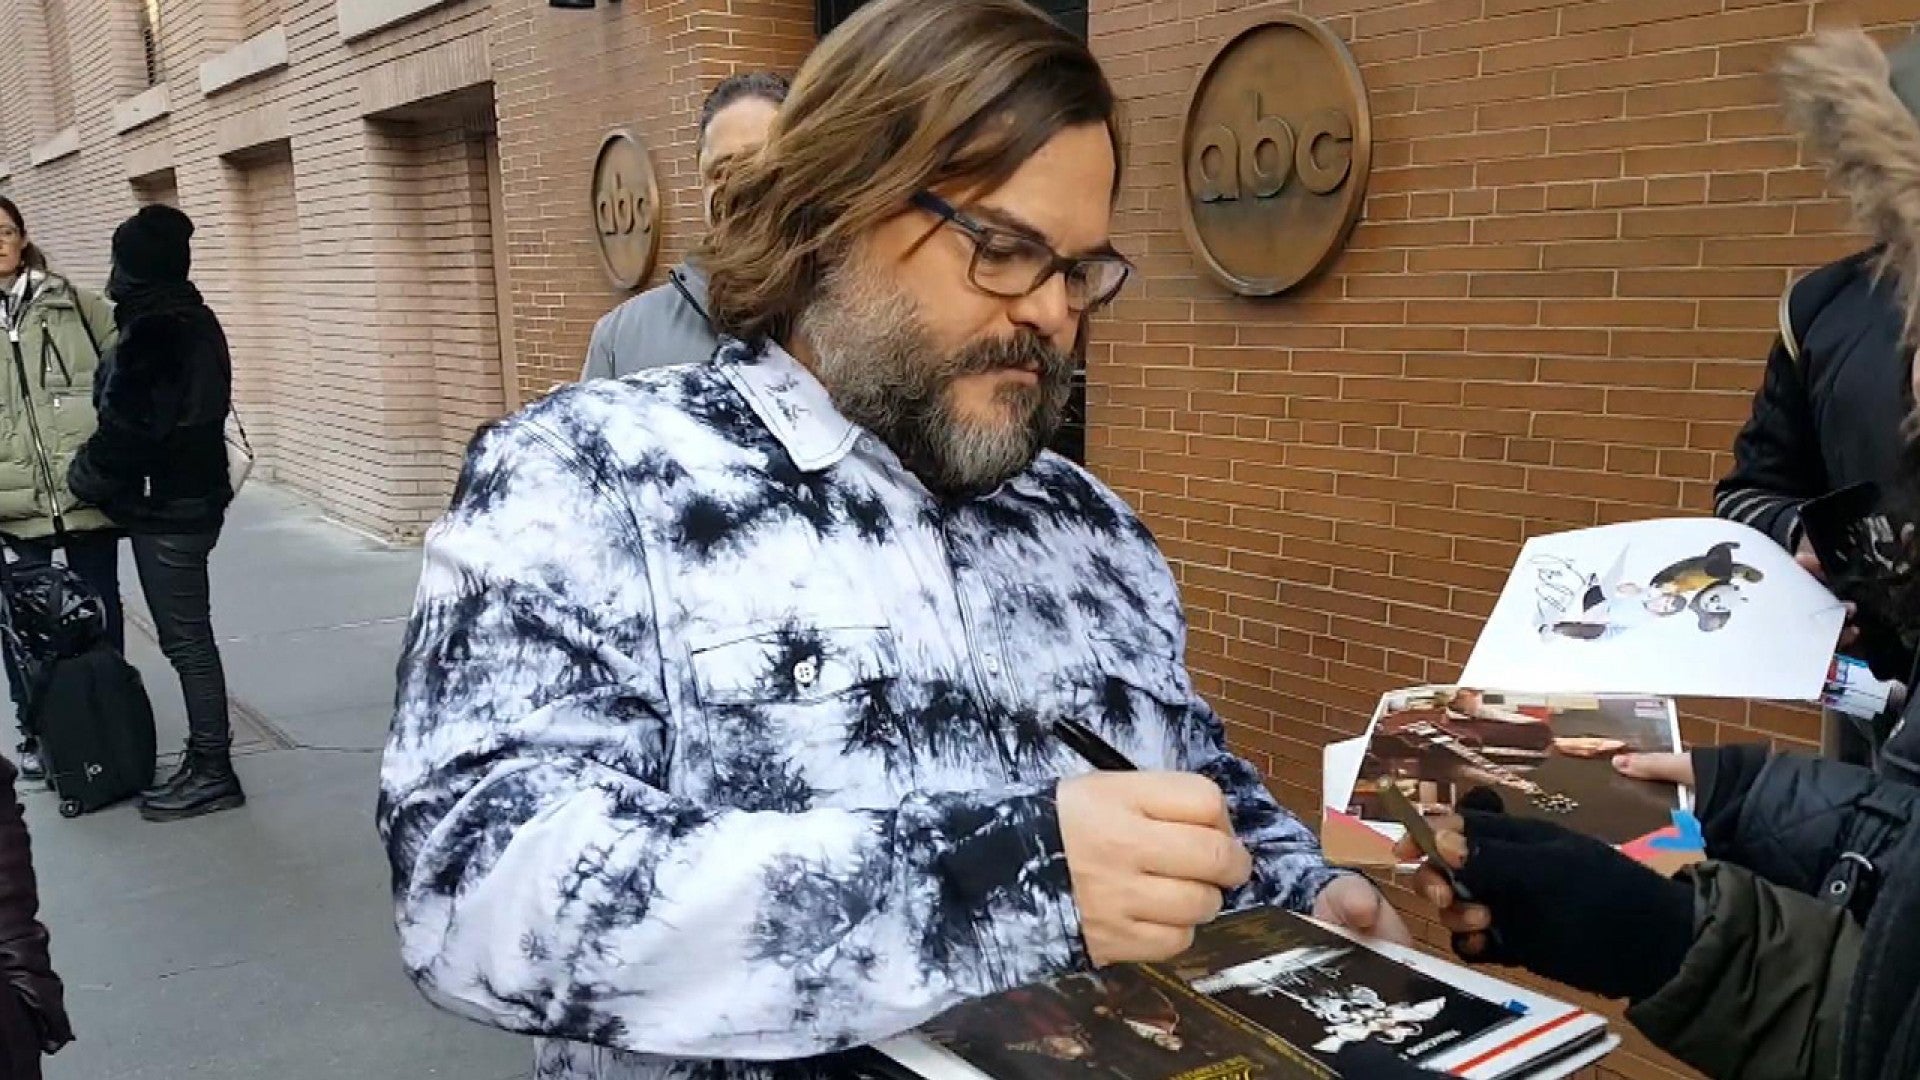 Is Jack Black Quitting His Acting Career? The Reason Will Shock You!